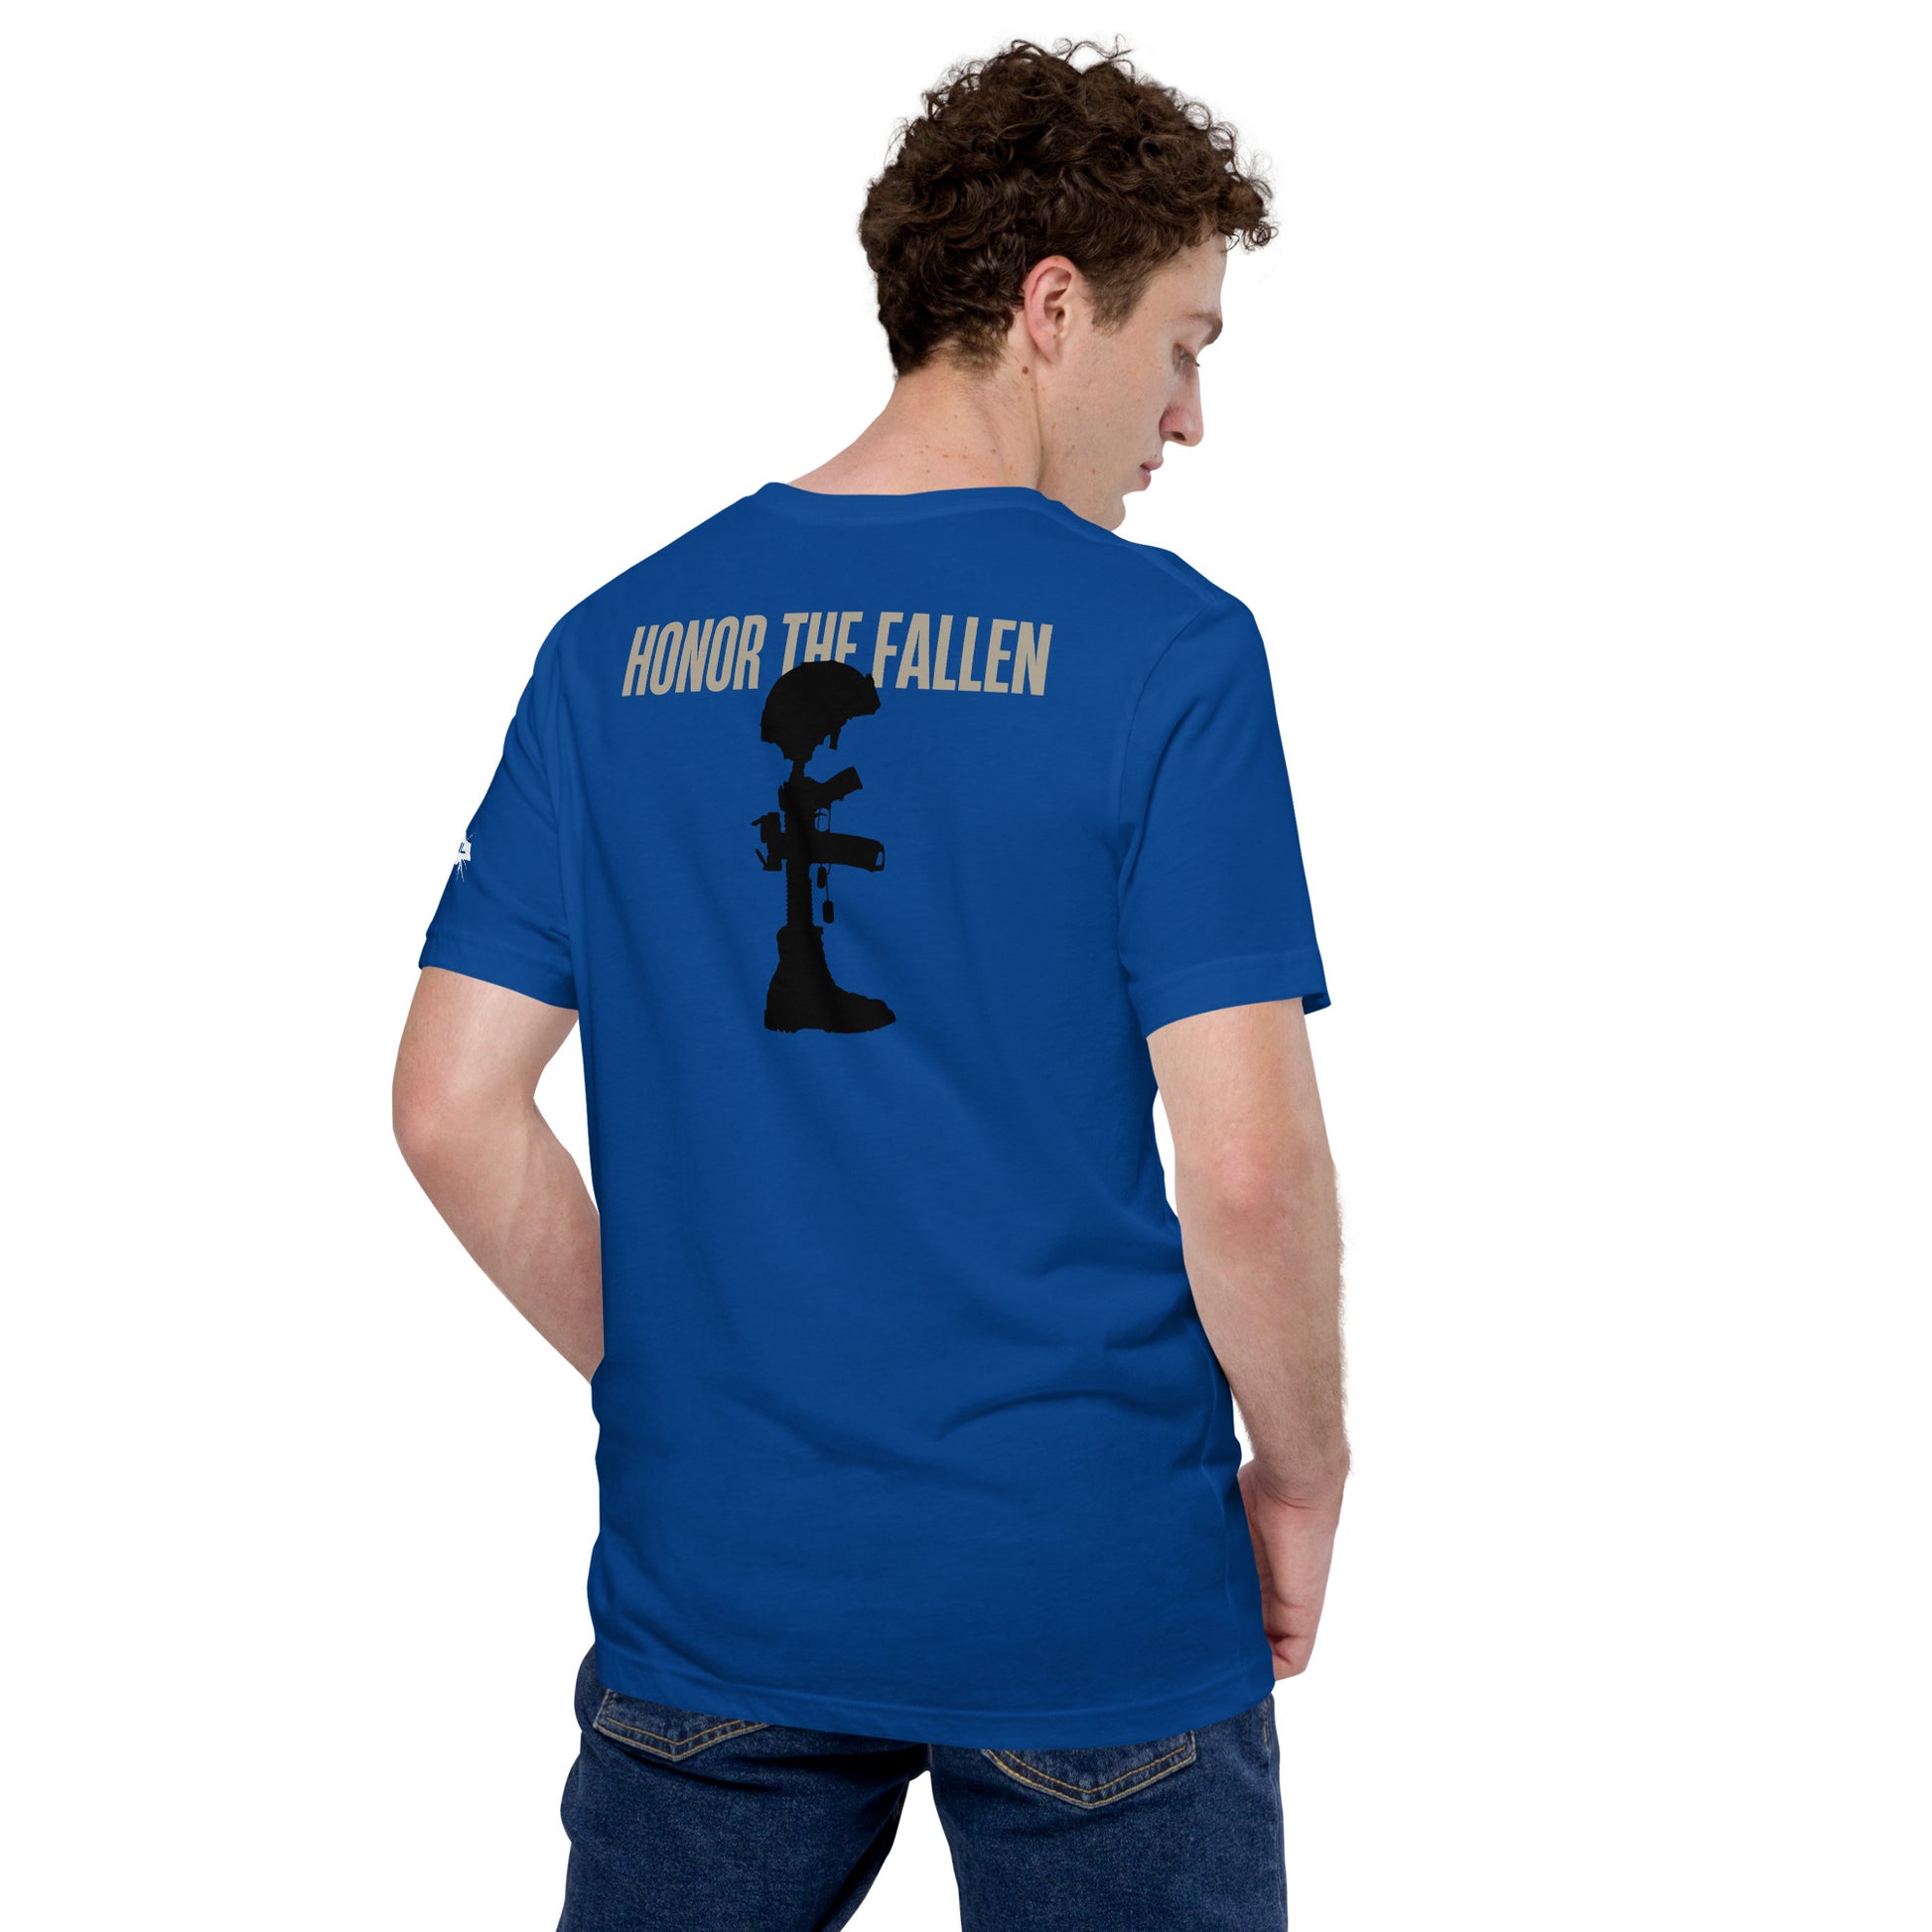 Honor the Fallen T-shirt, a powerful tribute to those who sacrificed for our freedom. Designed for Memorial Day, Royal Blue Unisex.